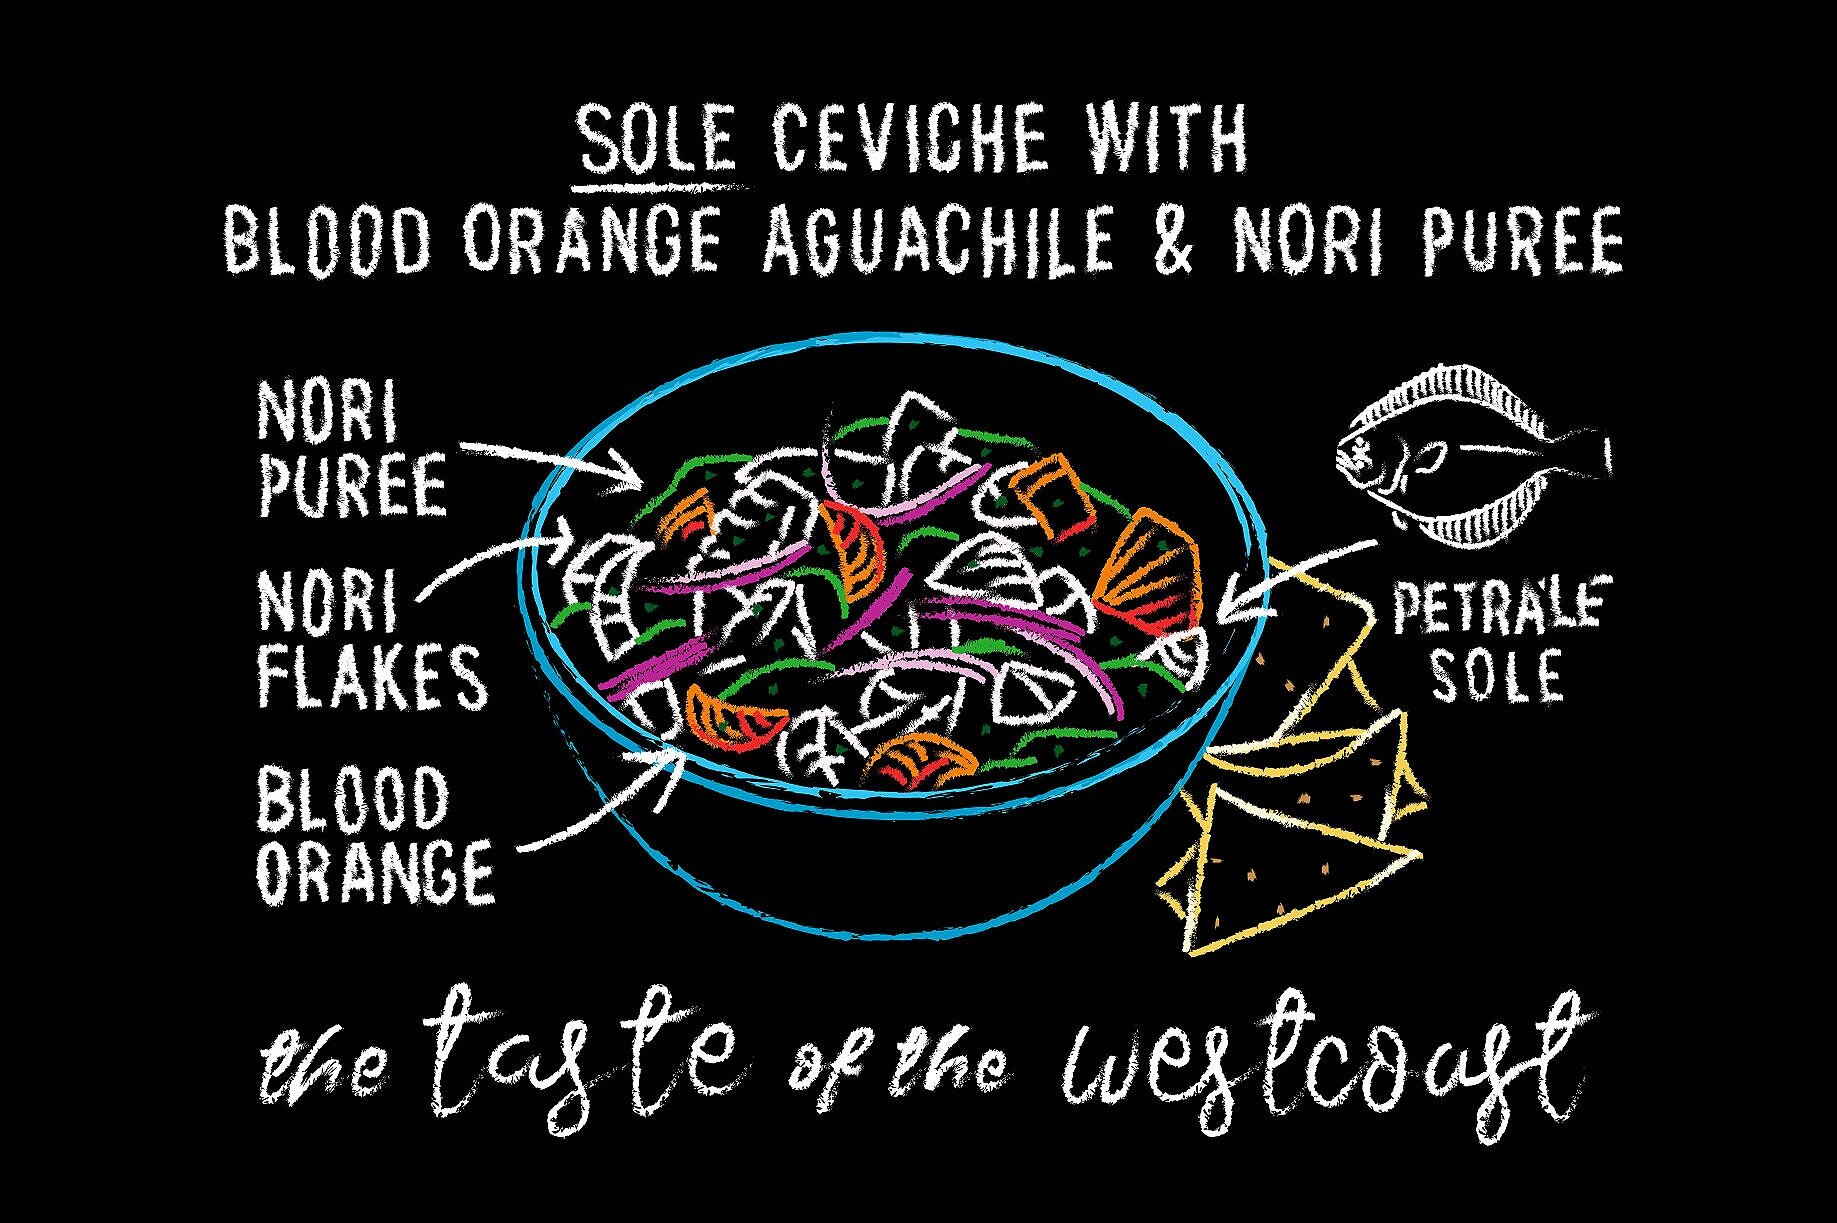 Positively Groundfish’s Ceviche of Petrale Sole/Pacific Dover Sole with Bloodorange Aguachile and Nori Puree (Copy)